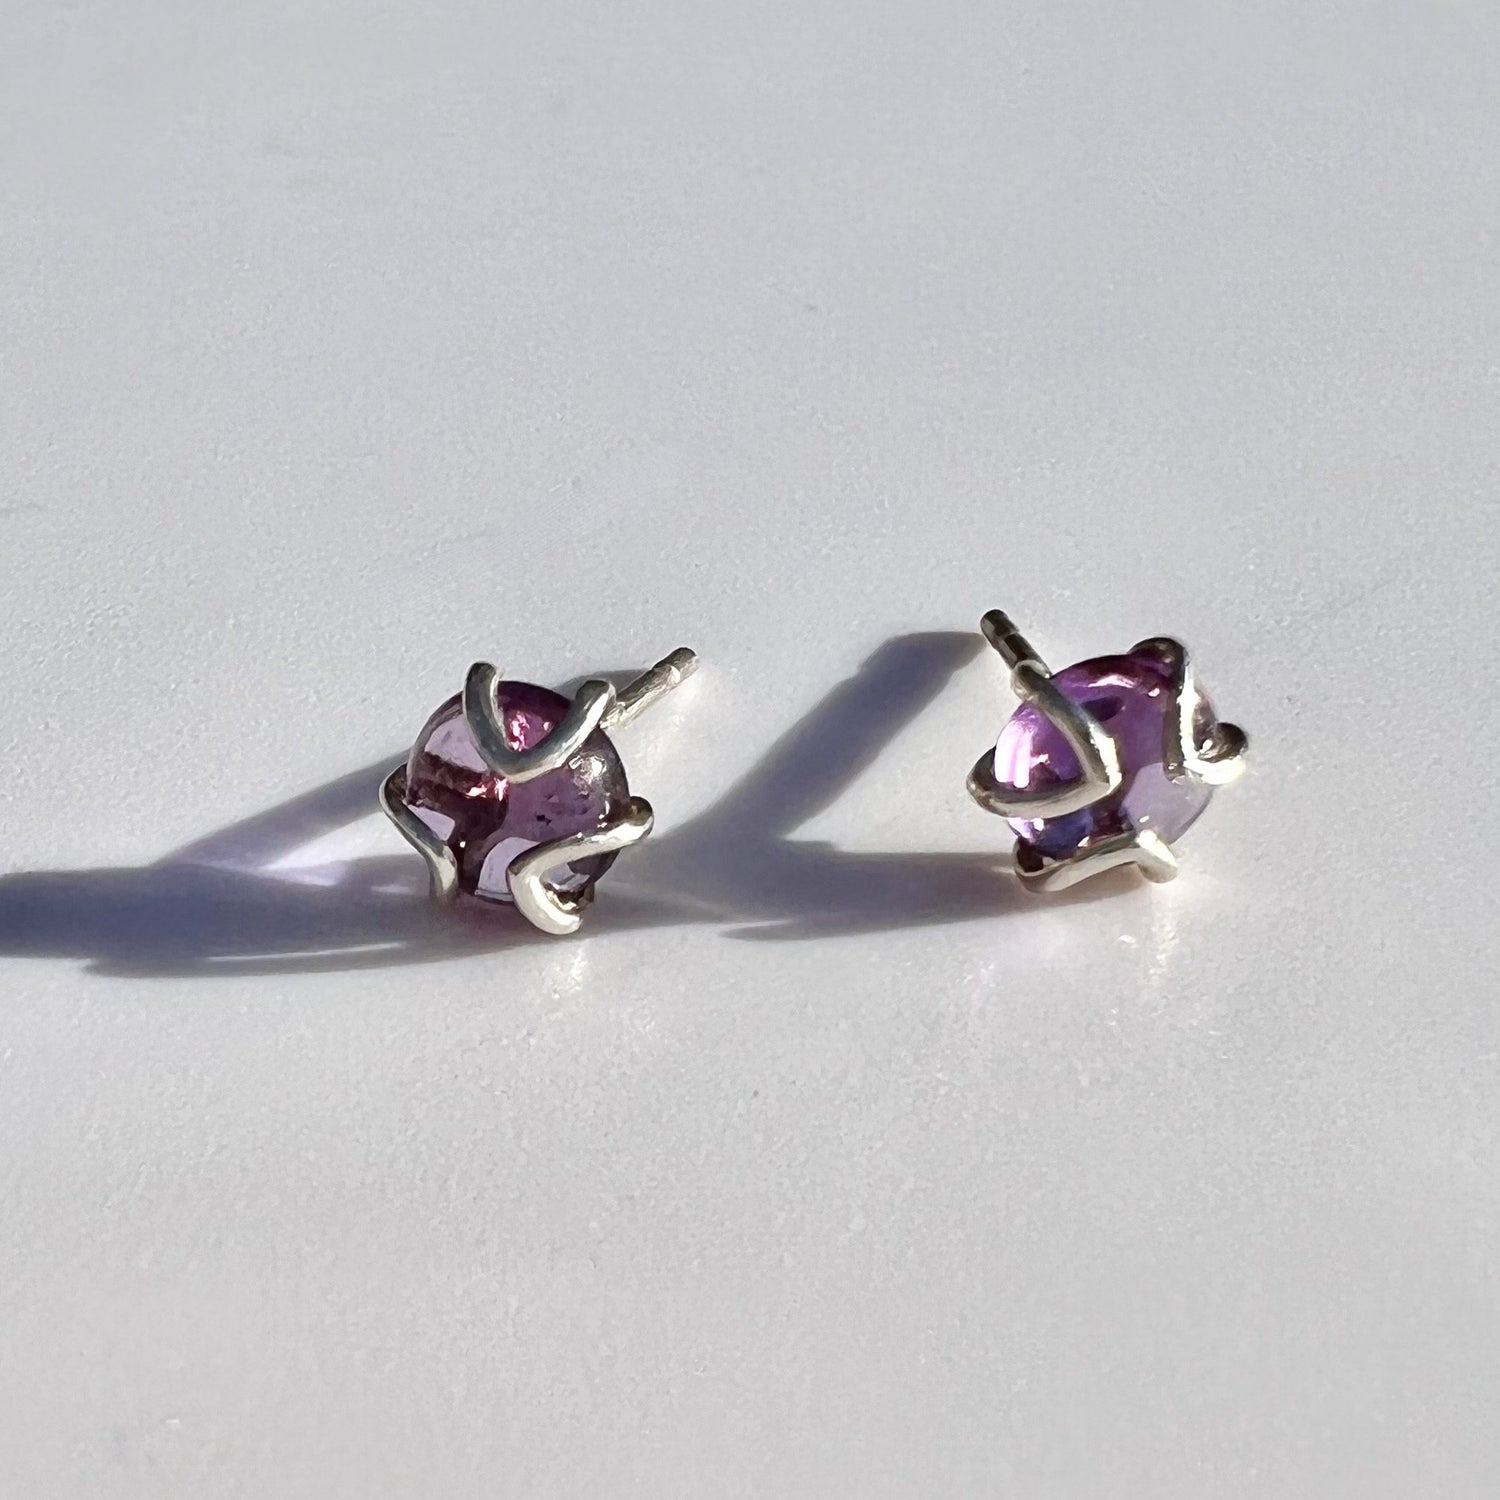 Fiore Sterling Silver and Amethyst Stud Earrings by Hannah Daye & Co